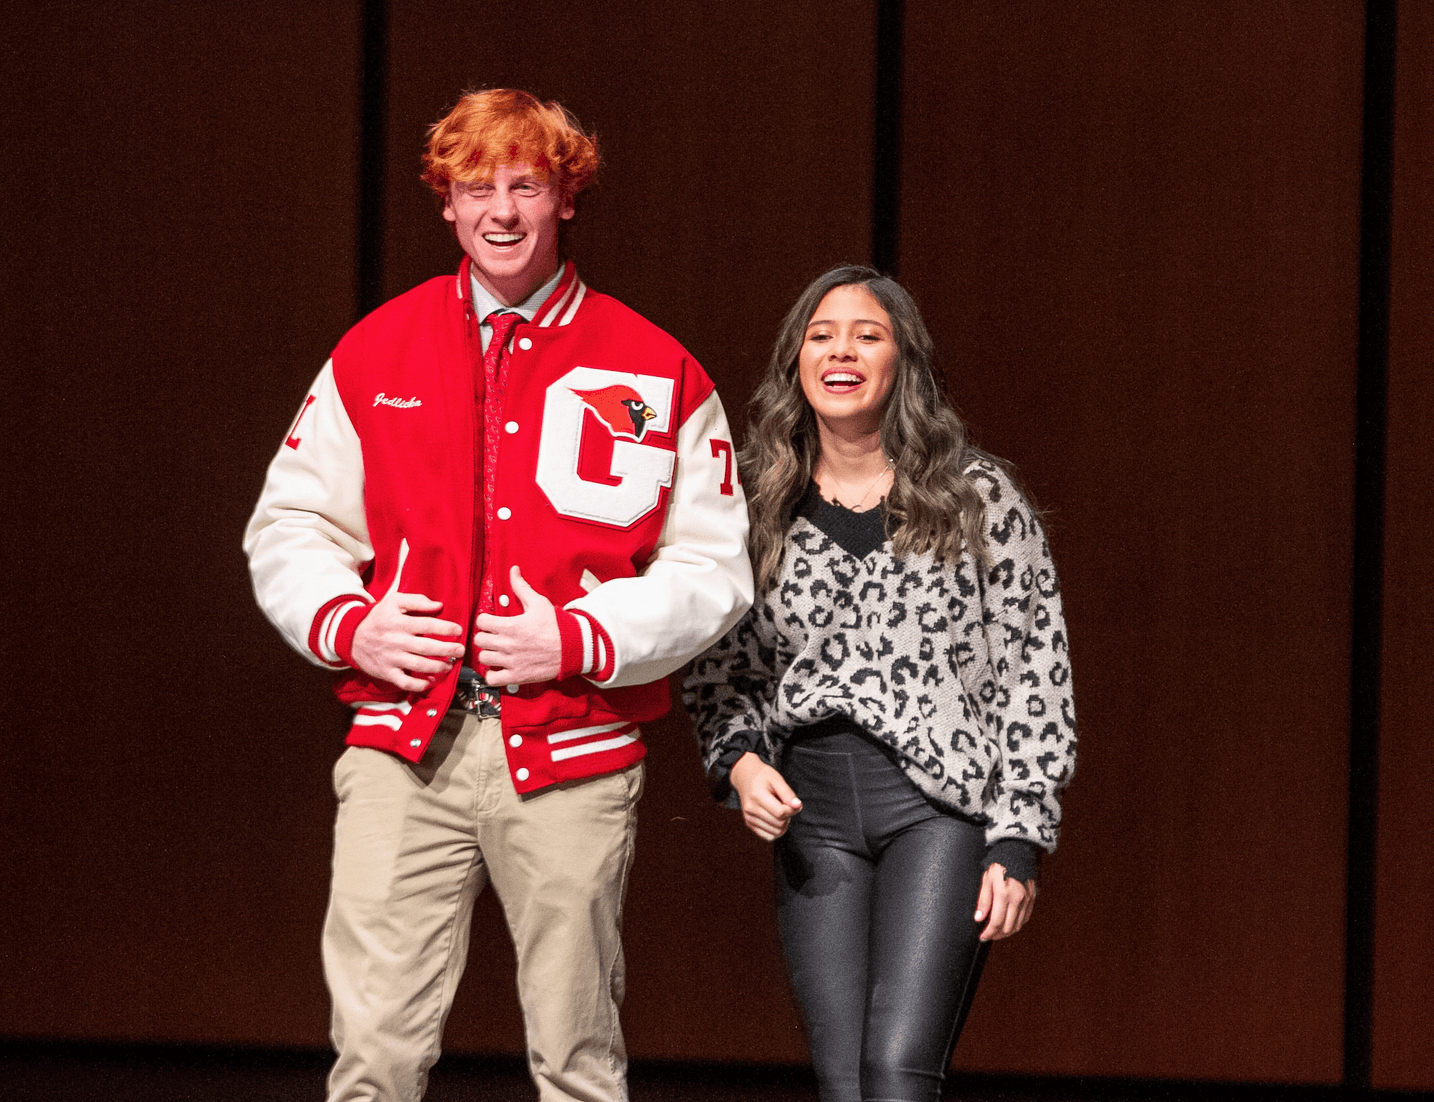 The GHS football players teamed up with the cheerleaders on a fashion show fundraiser. Nov 9, 2019 Photo courtesy: Anke Judice